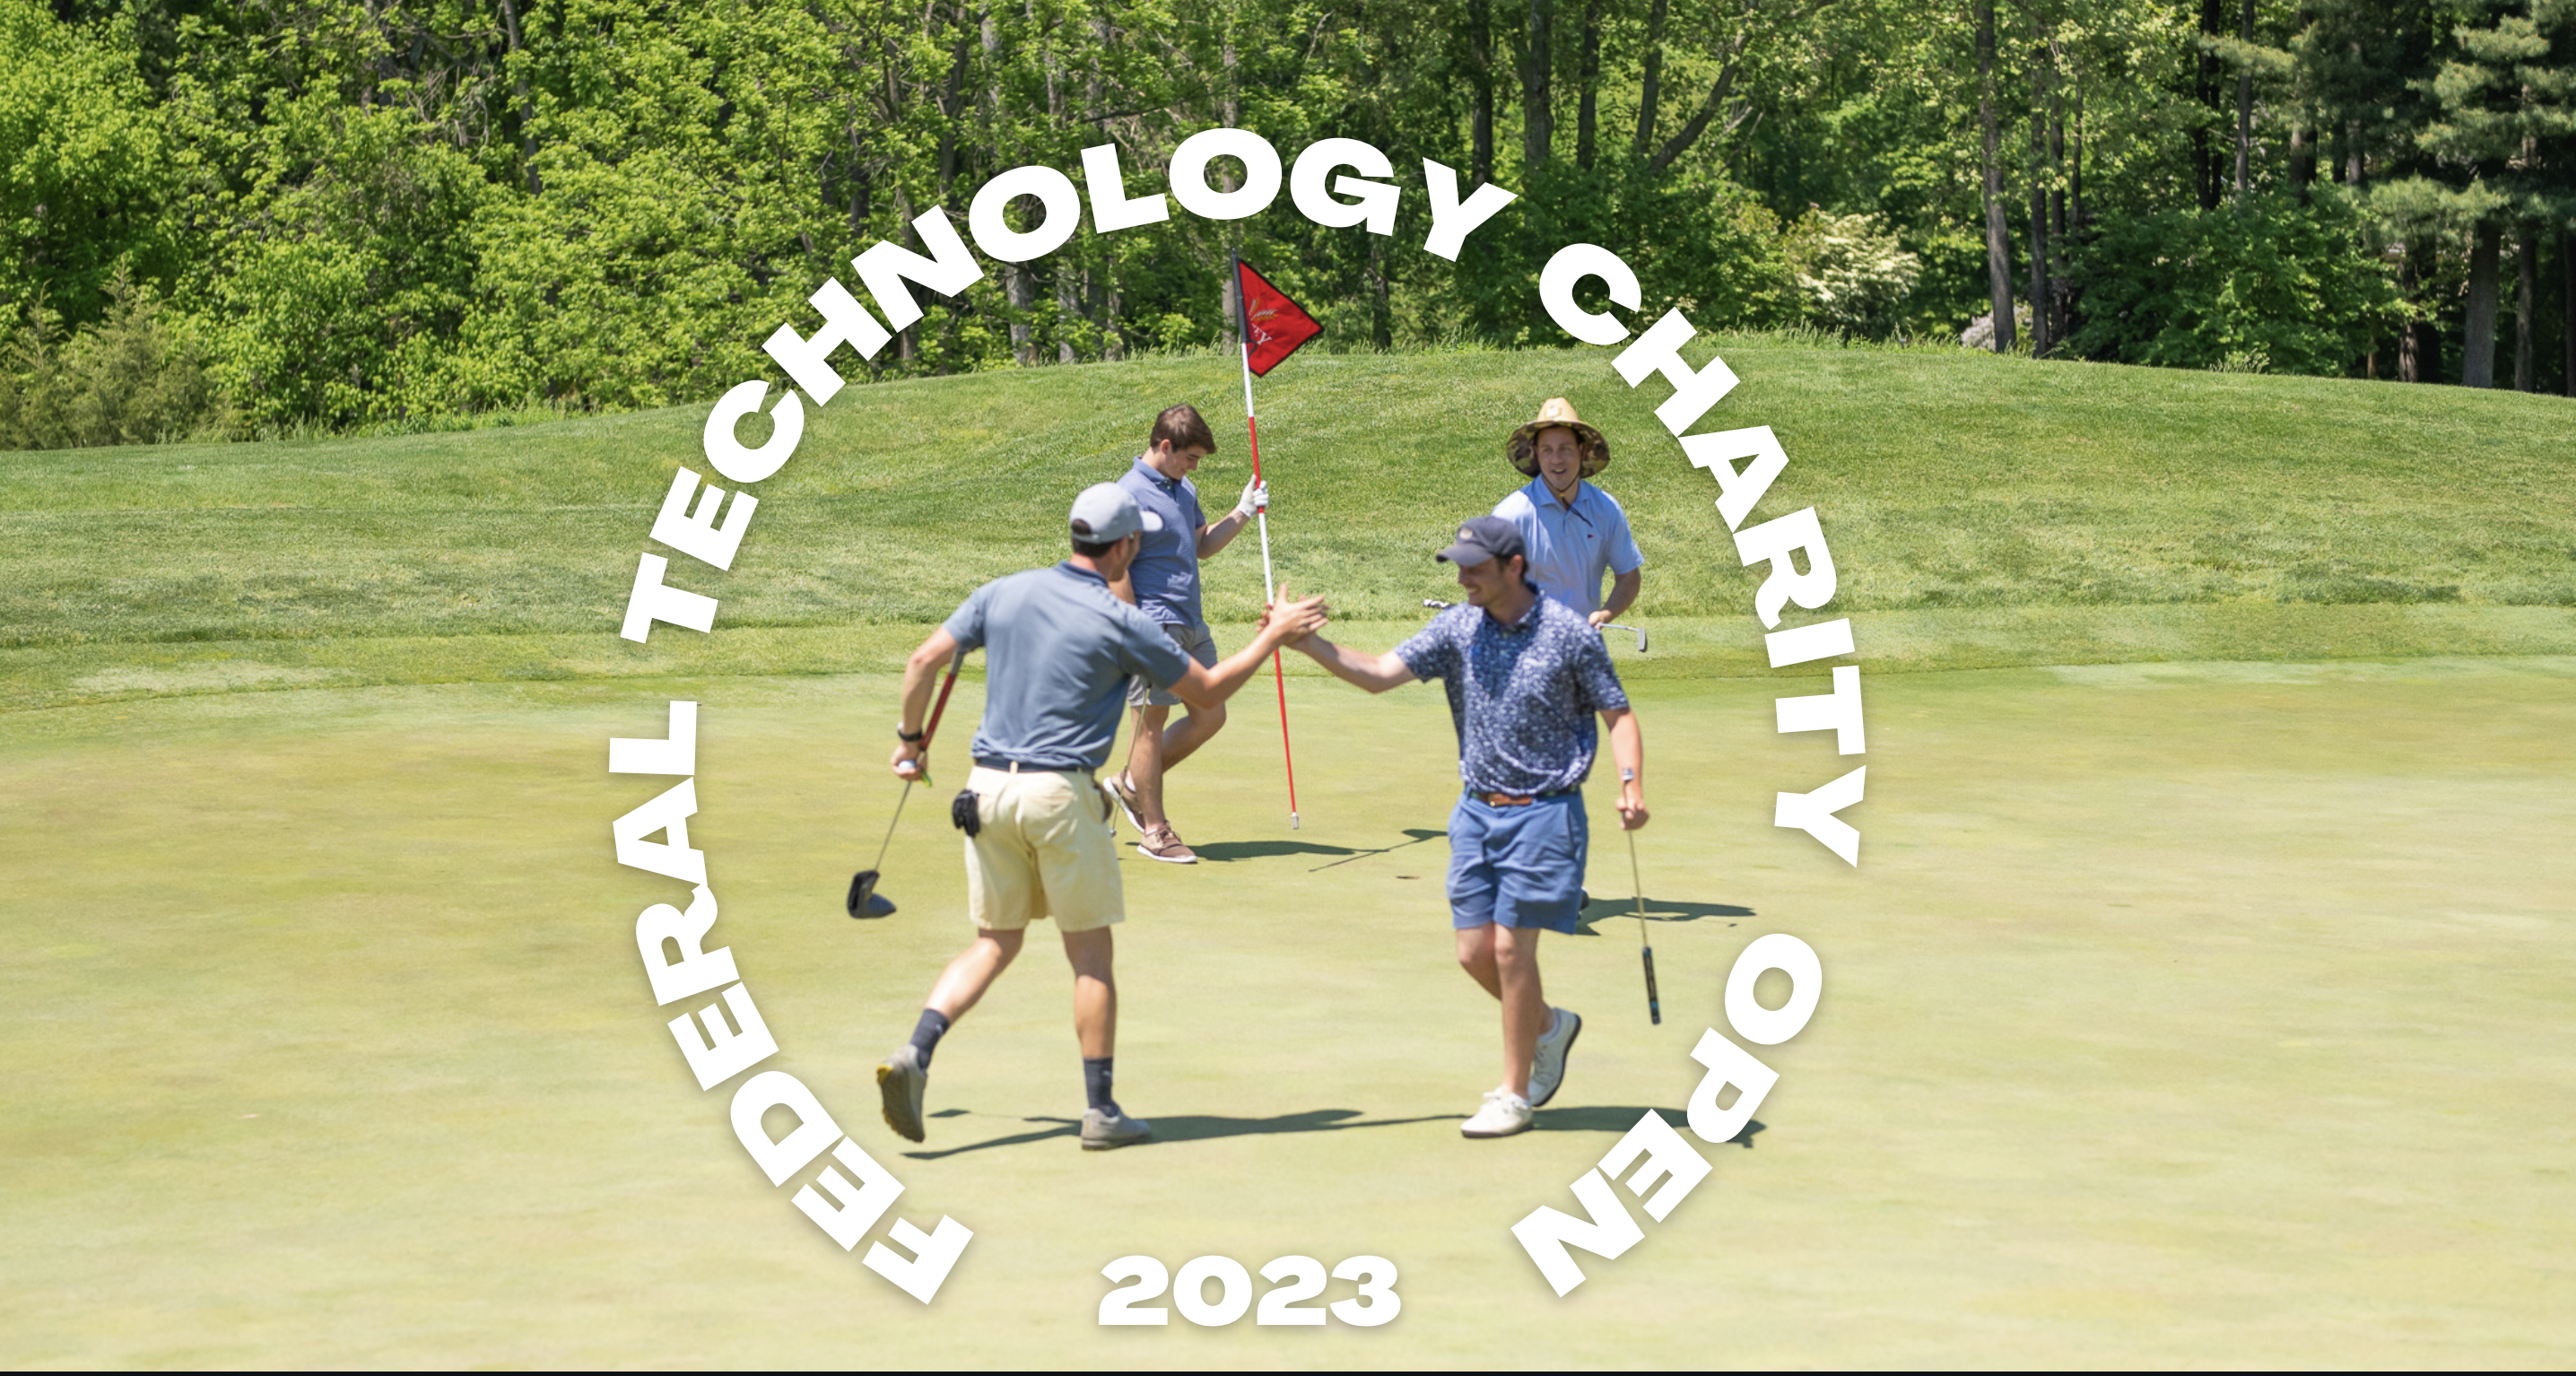 Federal Technology Charity Open Golf Tournament - 3rd Annual